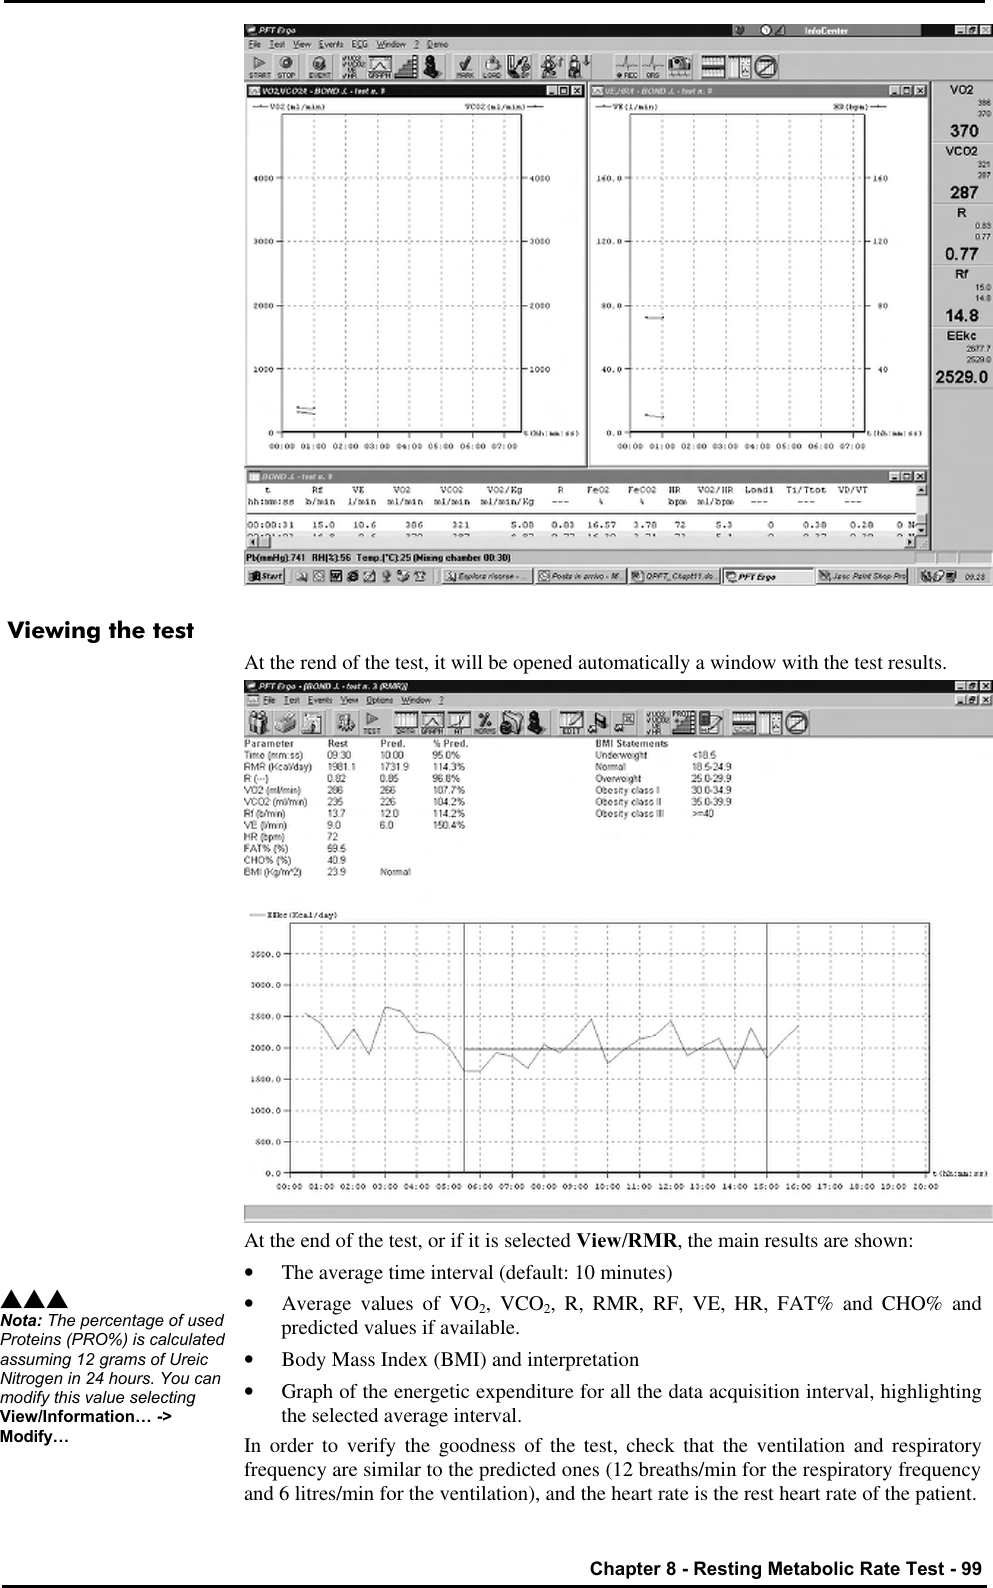   Chapter 8 - Resting Metabolic Rate Test - 99  Viewing the test At the rend of the test, it will be opened automatically a window with the test results.  At the end of the test, or if it is selected View/RMR, the main results are shown: • The average time interval (default: 10 minutes) • Average values of VO2, VCO2, R, RMR, RF, VE, HR, FAT% and CHO% and predicted values if available. • Body Mass Index (BMI) and interpretation • Graph of the energetic expenditure for all the data acquisition interval, highlighting the selected average interval. In order to verify the goodness of the test, check that the ventilation and respiratory frequency are similar to the predicted ones (12 breaths/min for the respiratory frequency and 6 litres/min for the ventilation), and the heart rate is the rest heart rate of the patient. sss Nota: The percentage of used Proteins (PRO%) is calculated assuming 12 grams of Ureic Nitrogen in 24 hours. You can modify this value selecting View/Information… -&gt; Modify… 